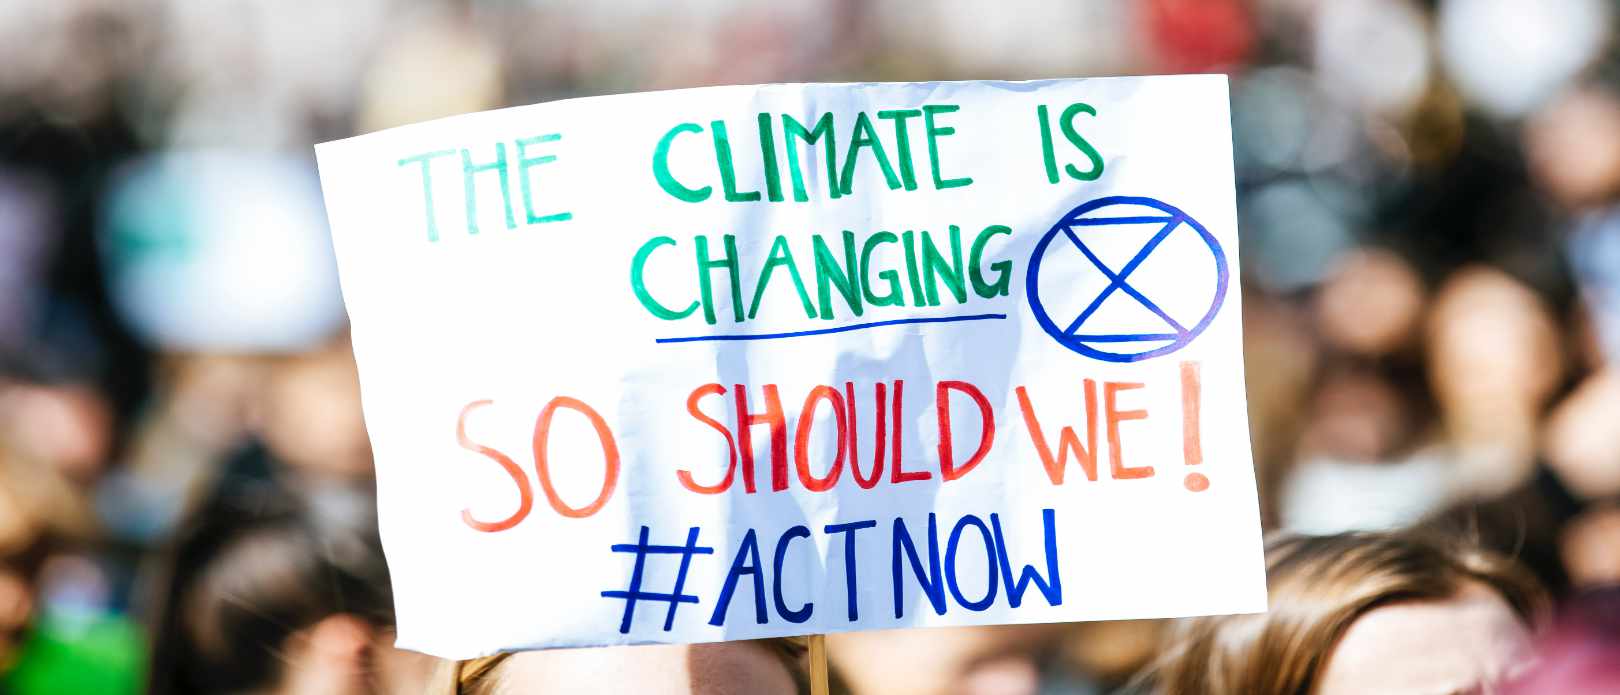 Person holding The Climate is changing sign